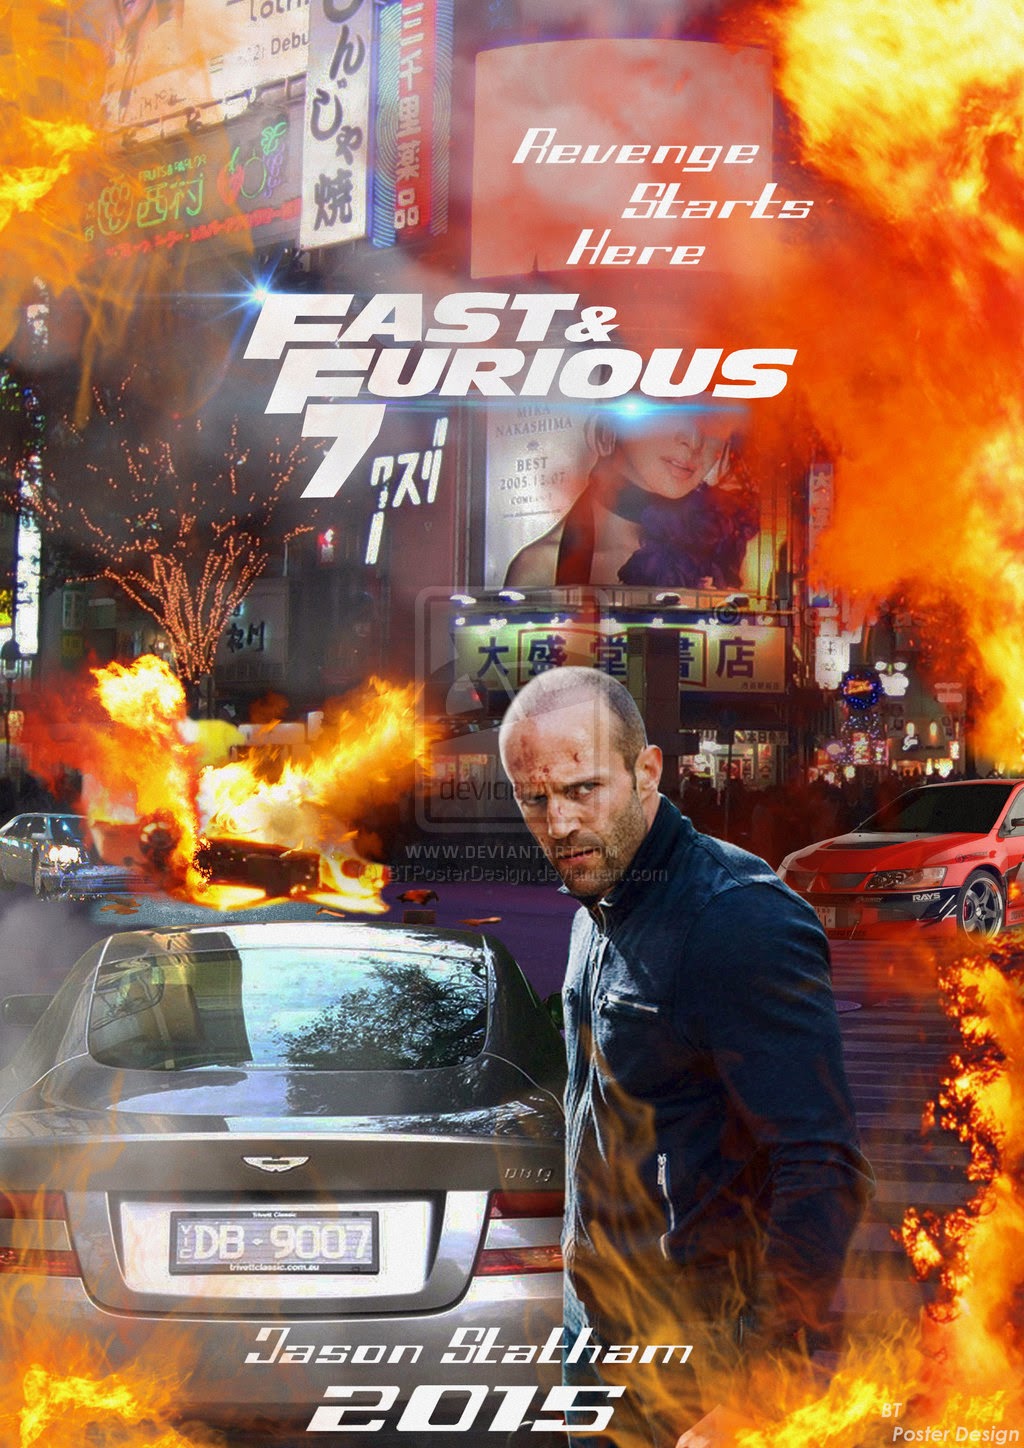 download fast and furious 7 full movie free